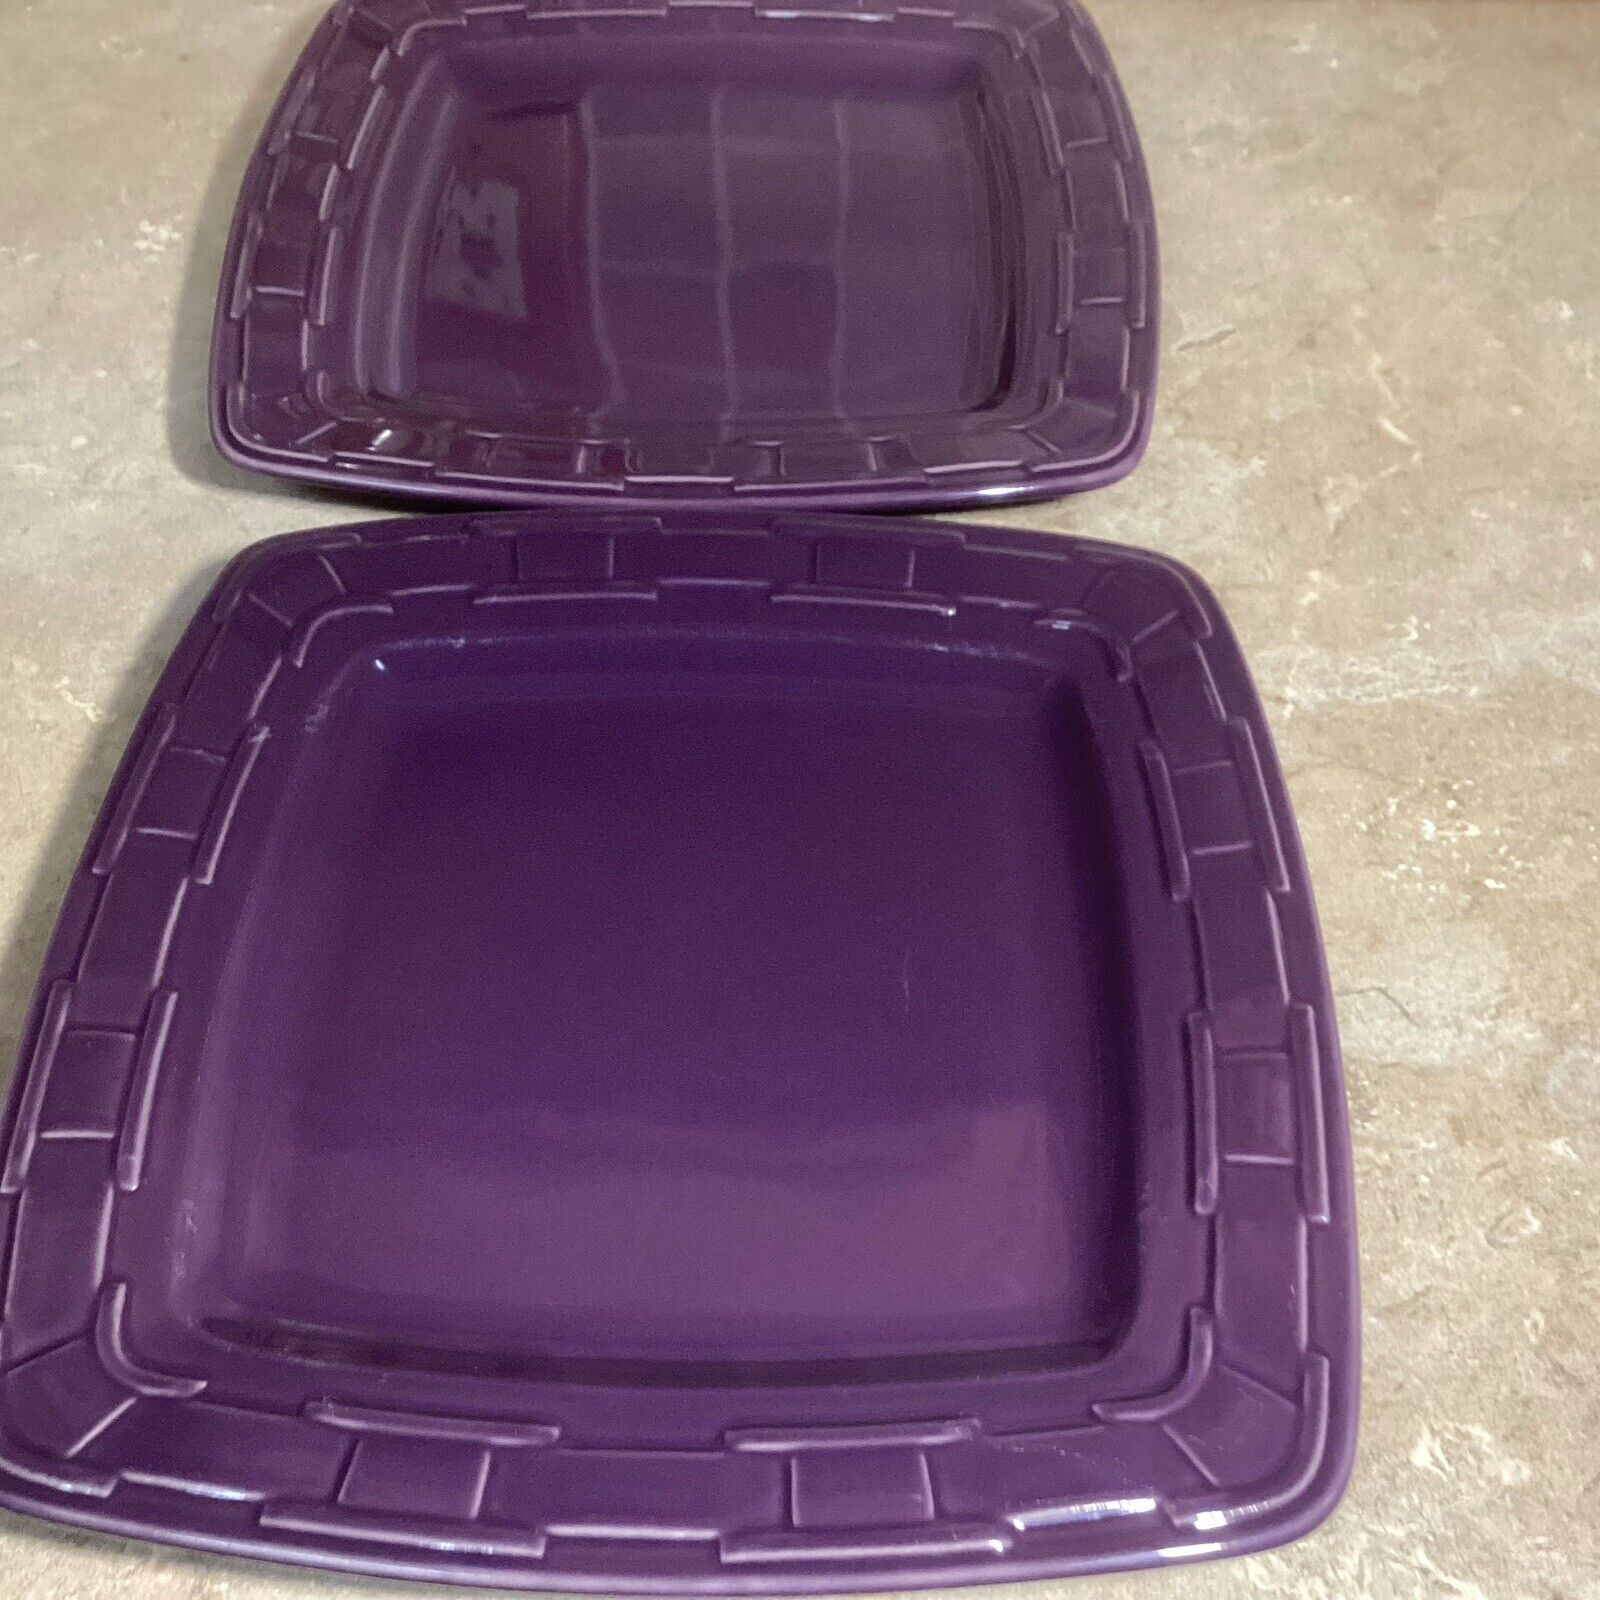 2 Longaberger Pottery Woven Traditions EGGPLANT Soft Square Dinner Plates 11”